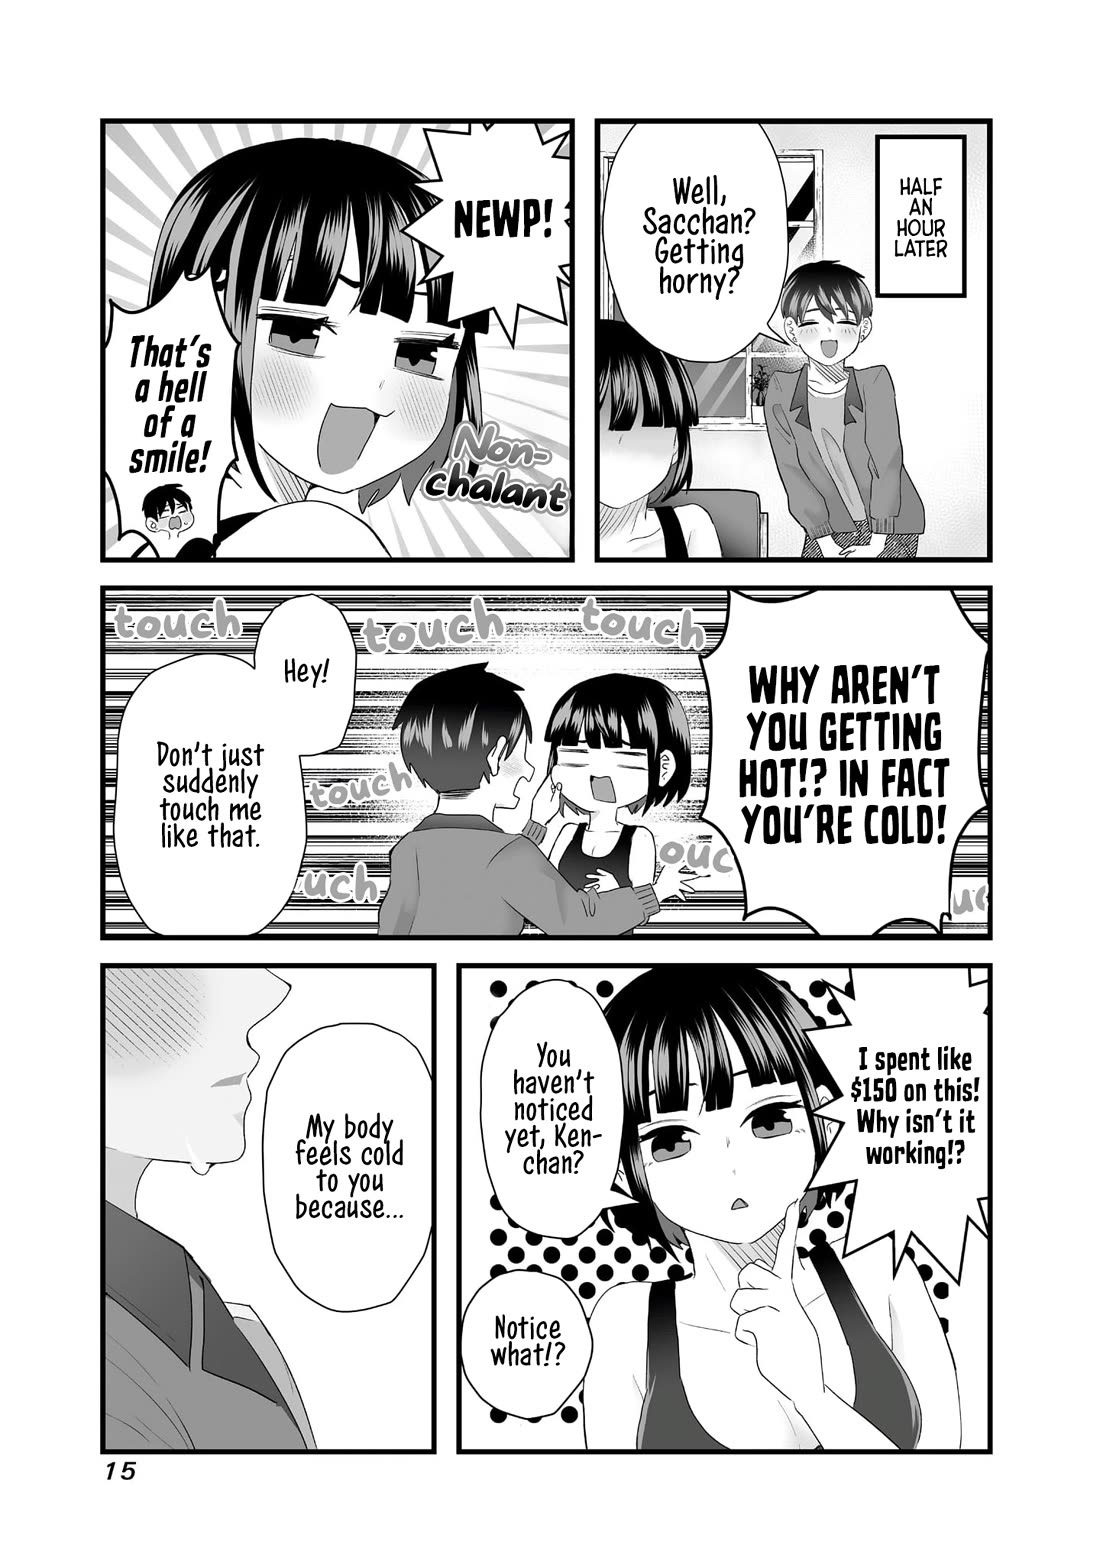 Sacchan and Ken-chan Are Going at it Again - chapter 2 - #3